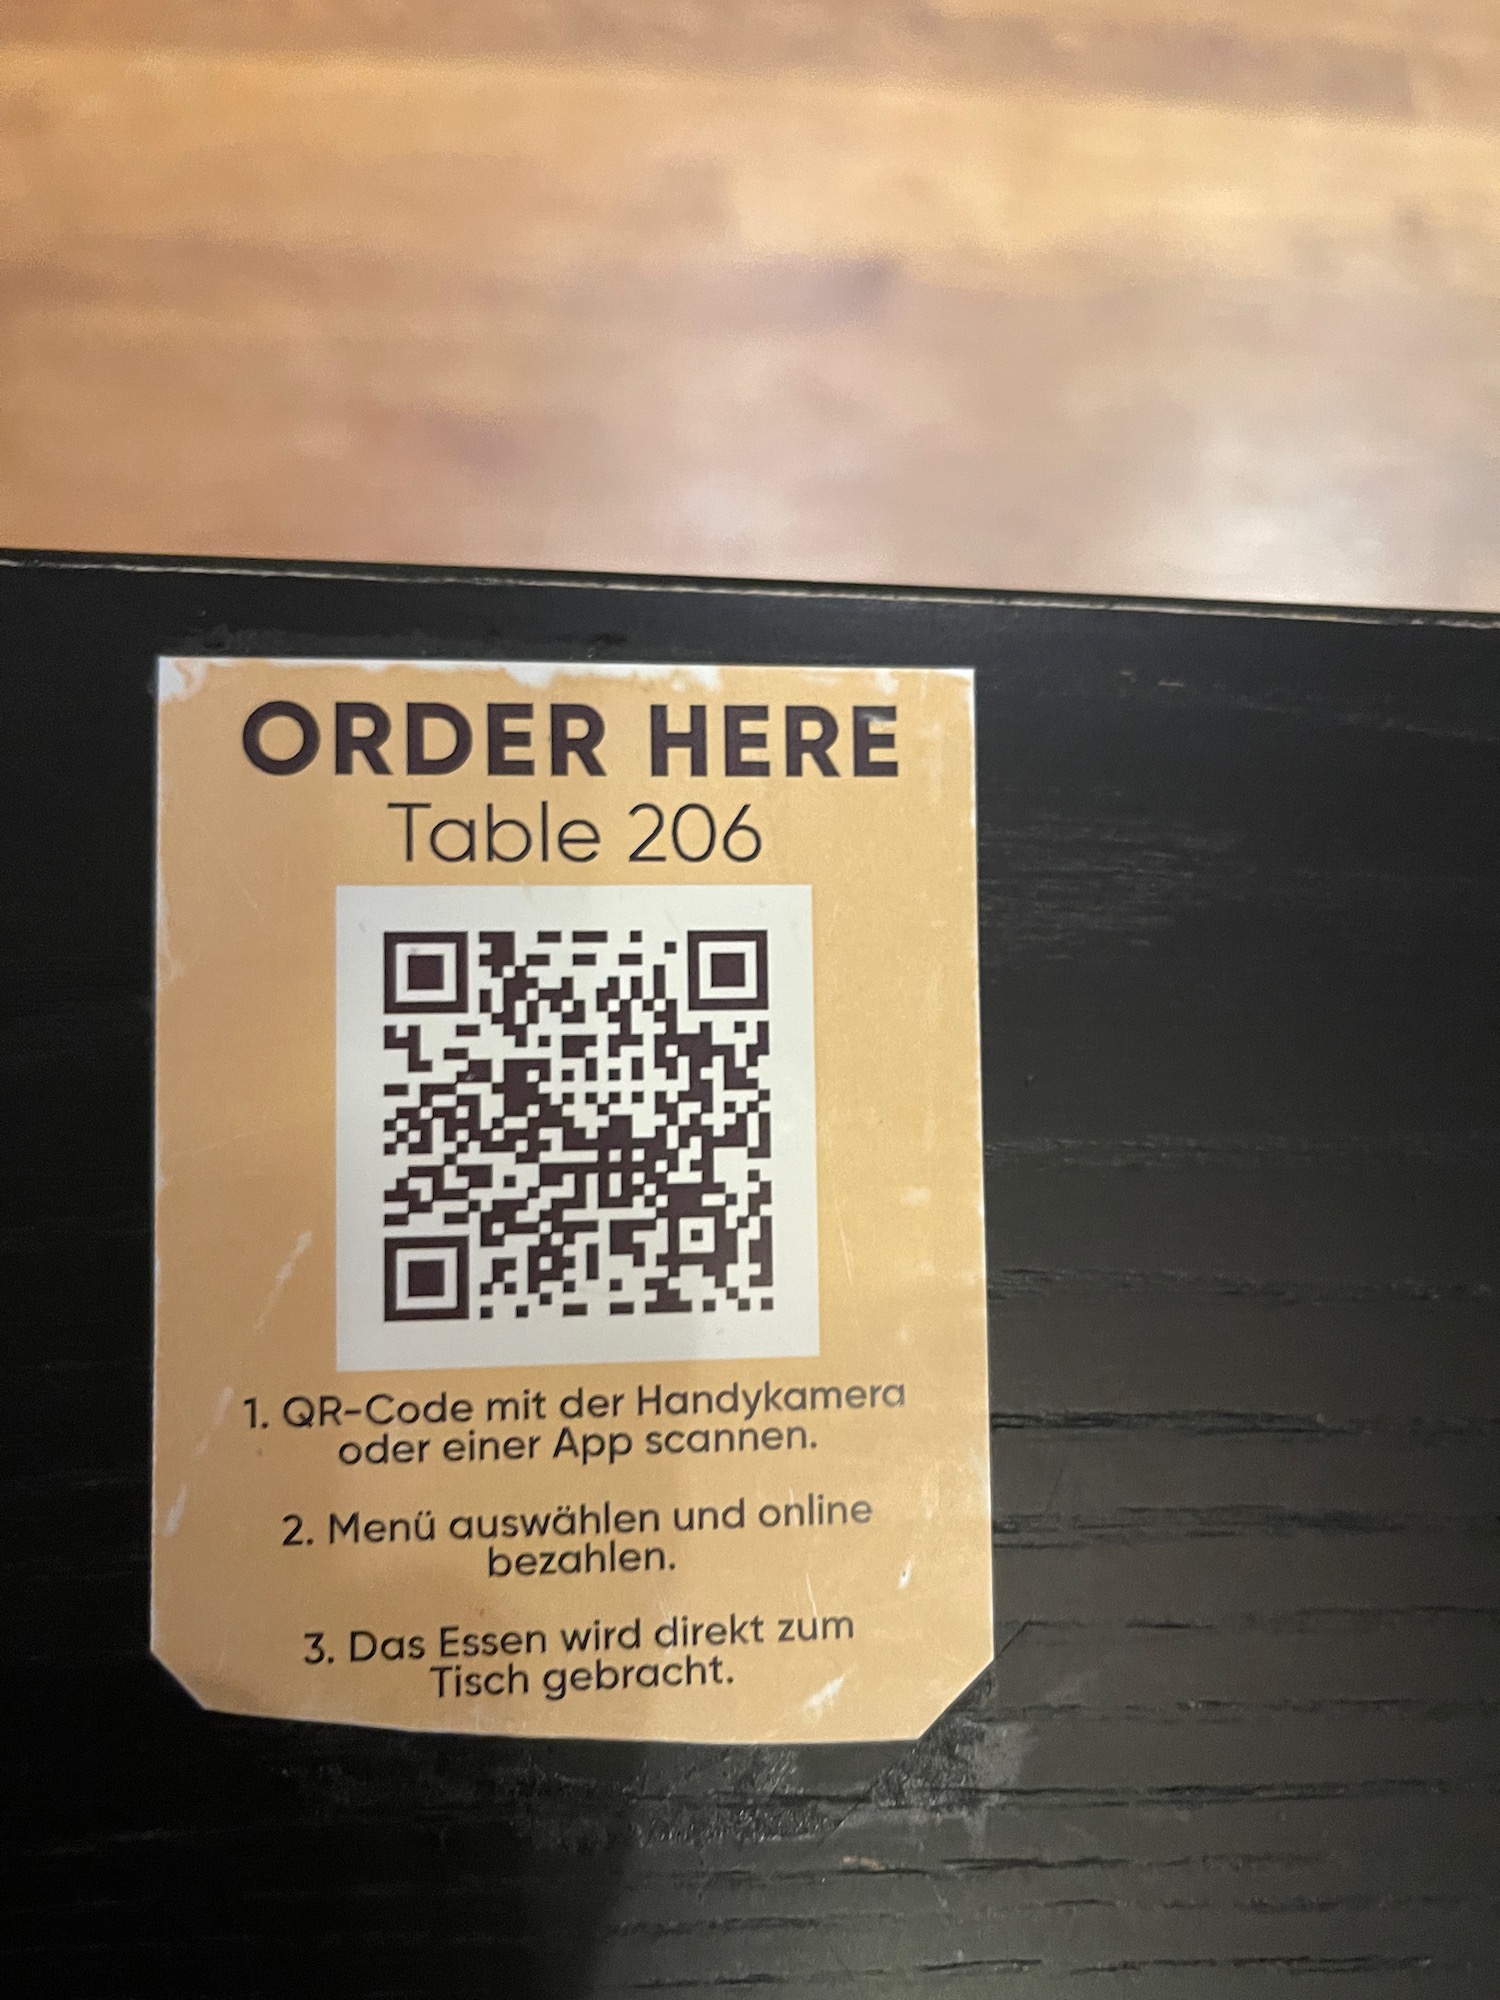 a qr code on a table